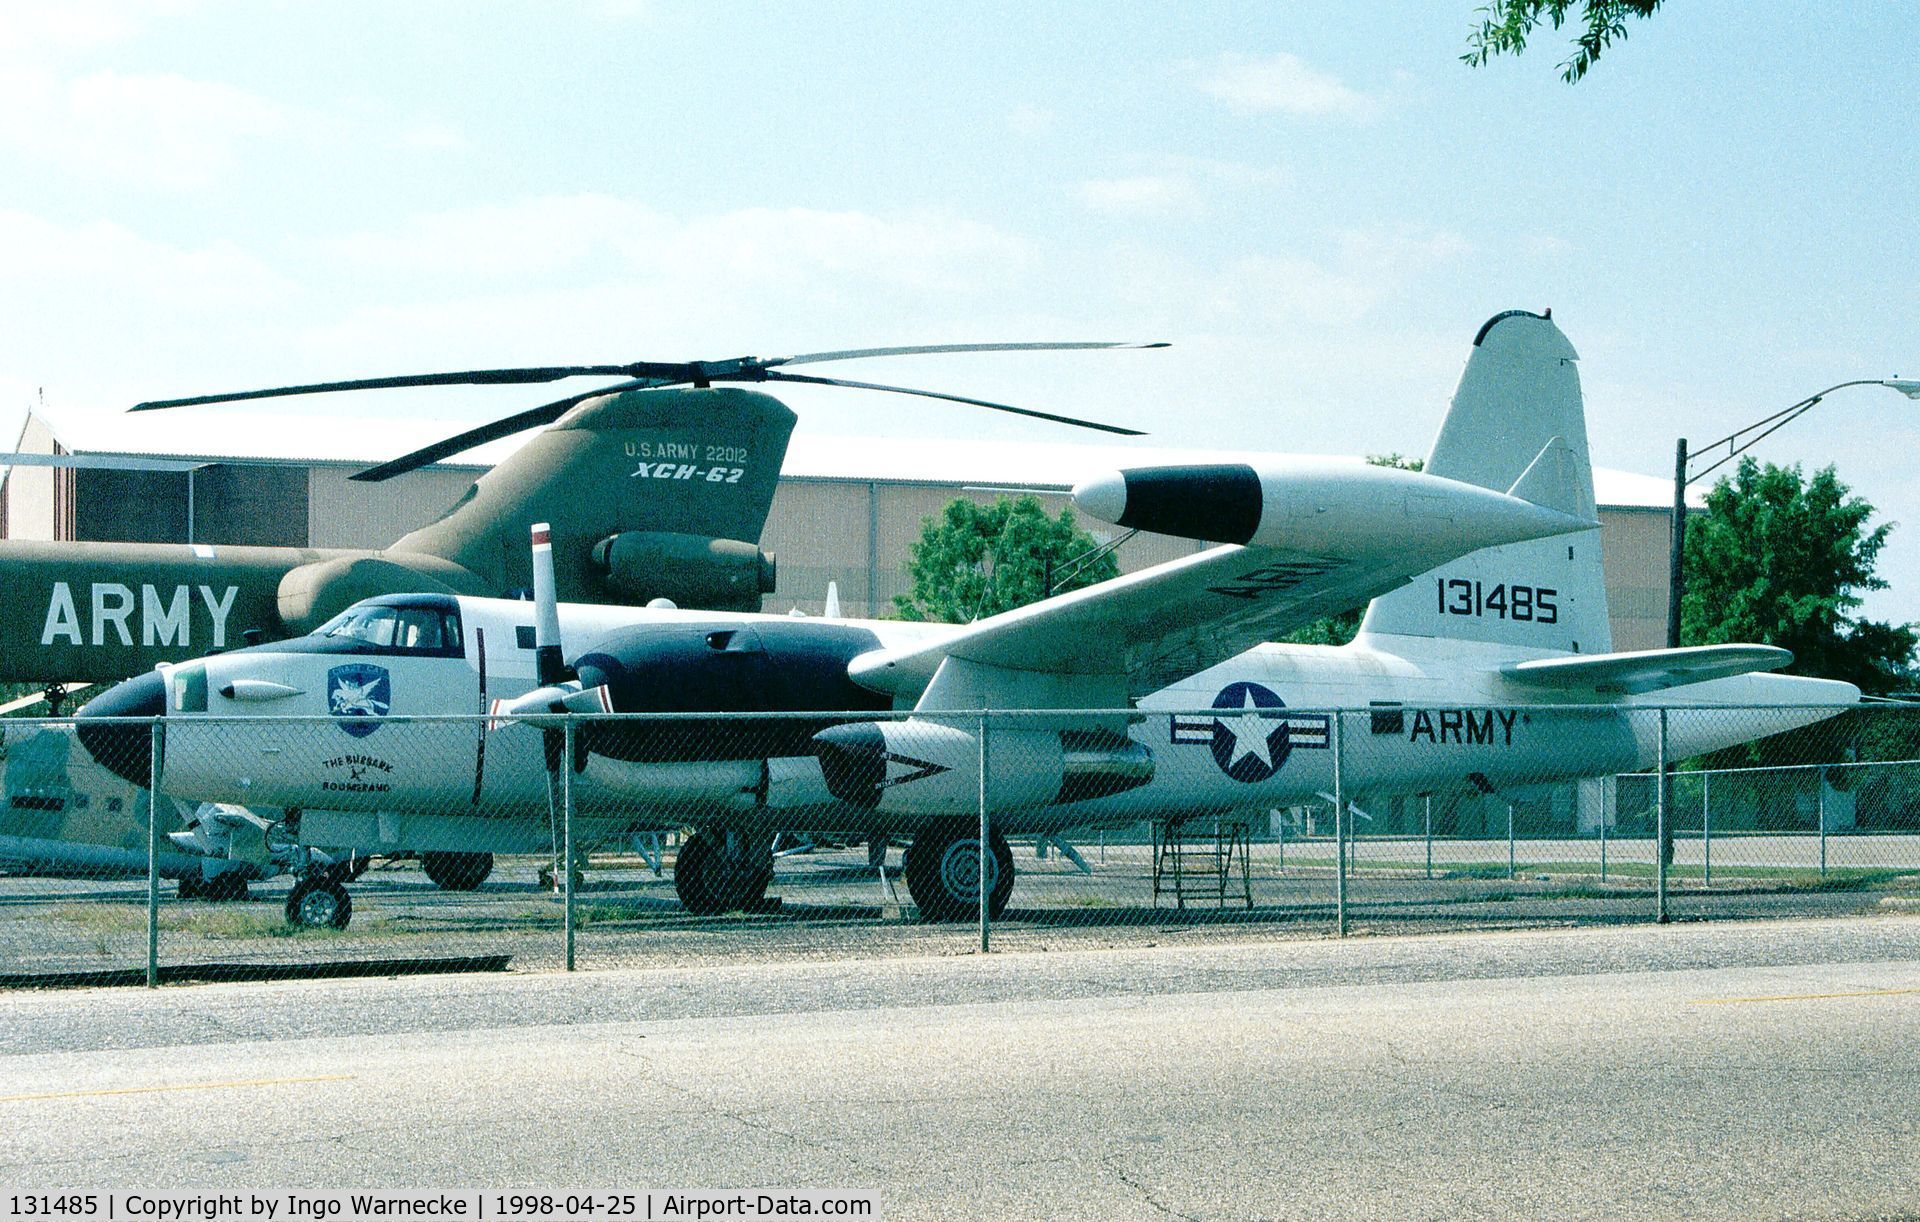 131485, Lockheed AP-2E Neptune C/N 426-5366, Lockheed AP-2E Neptune at the US Army Aviation Museum, Ft Rucker AL